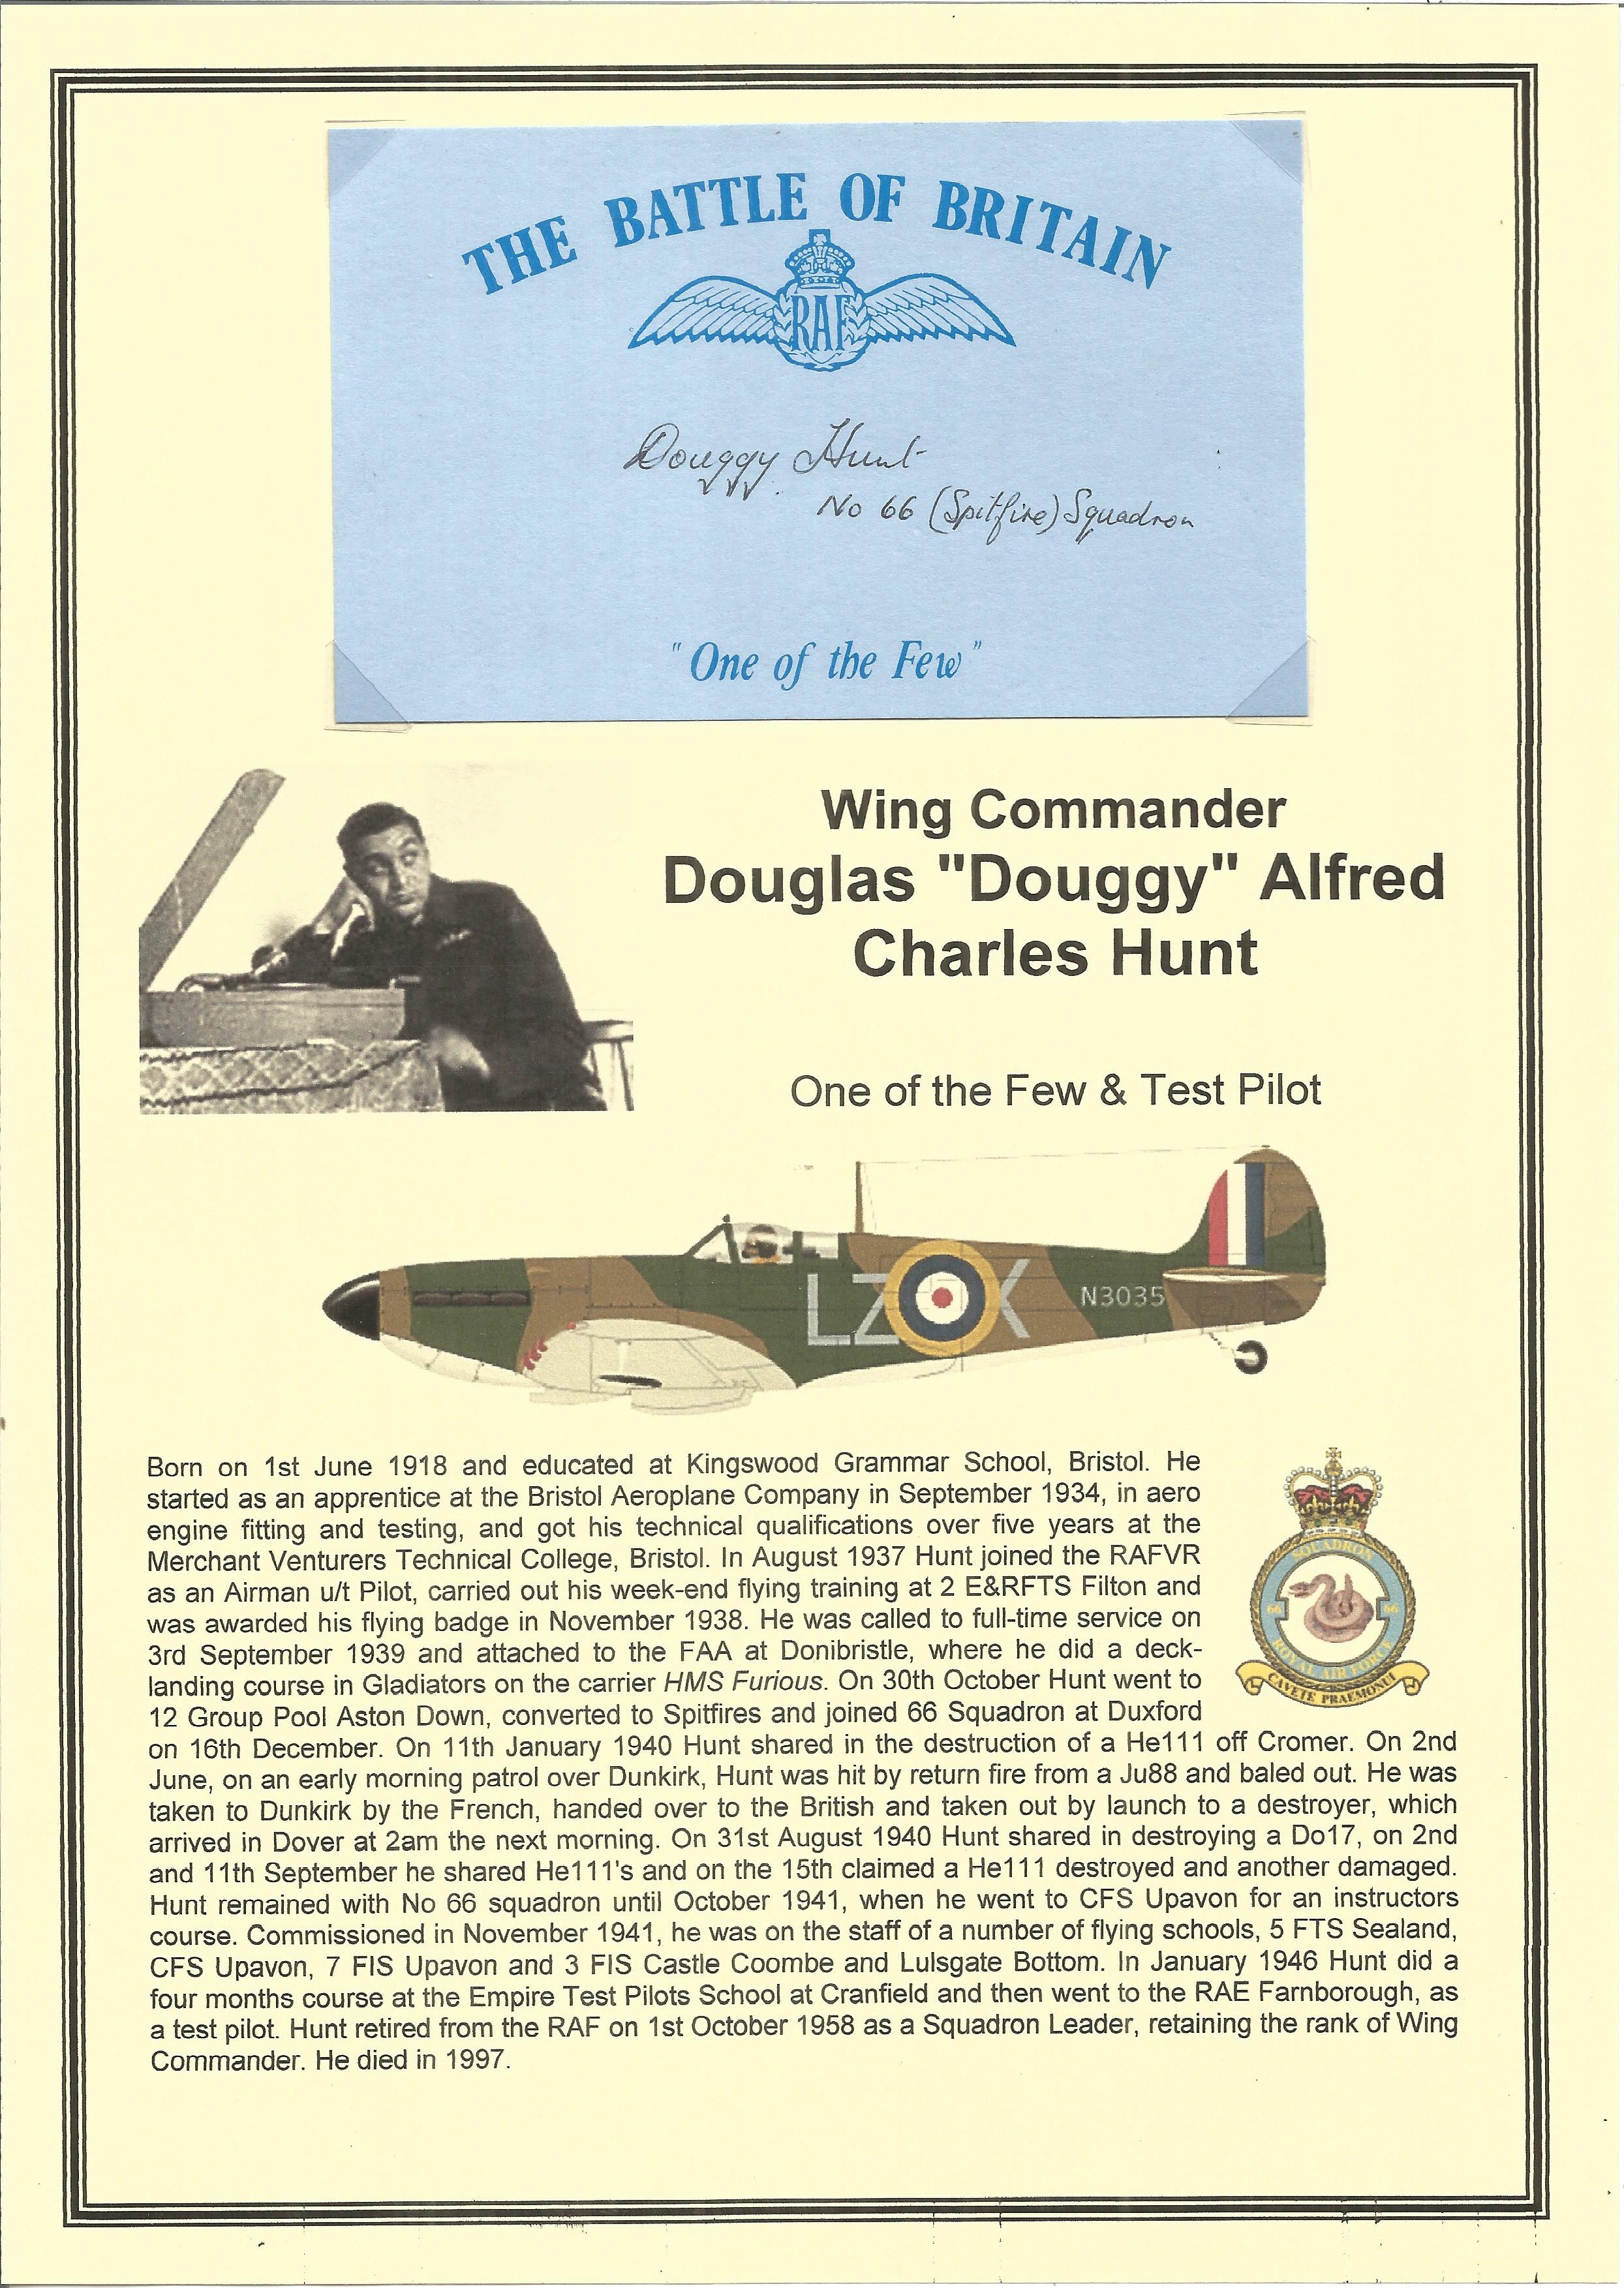 Wing Commander Douglas Douggy Alfred Charles Hunt. Signed 5 x 3 inch blue card with RAF logo. Set on